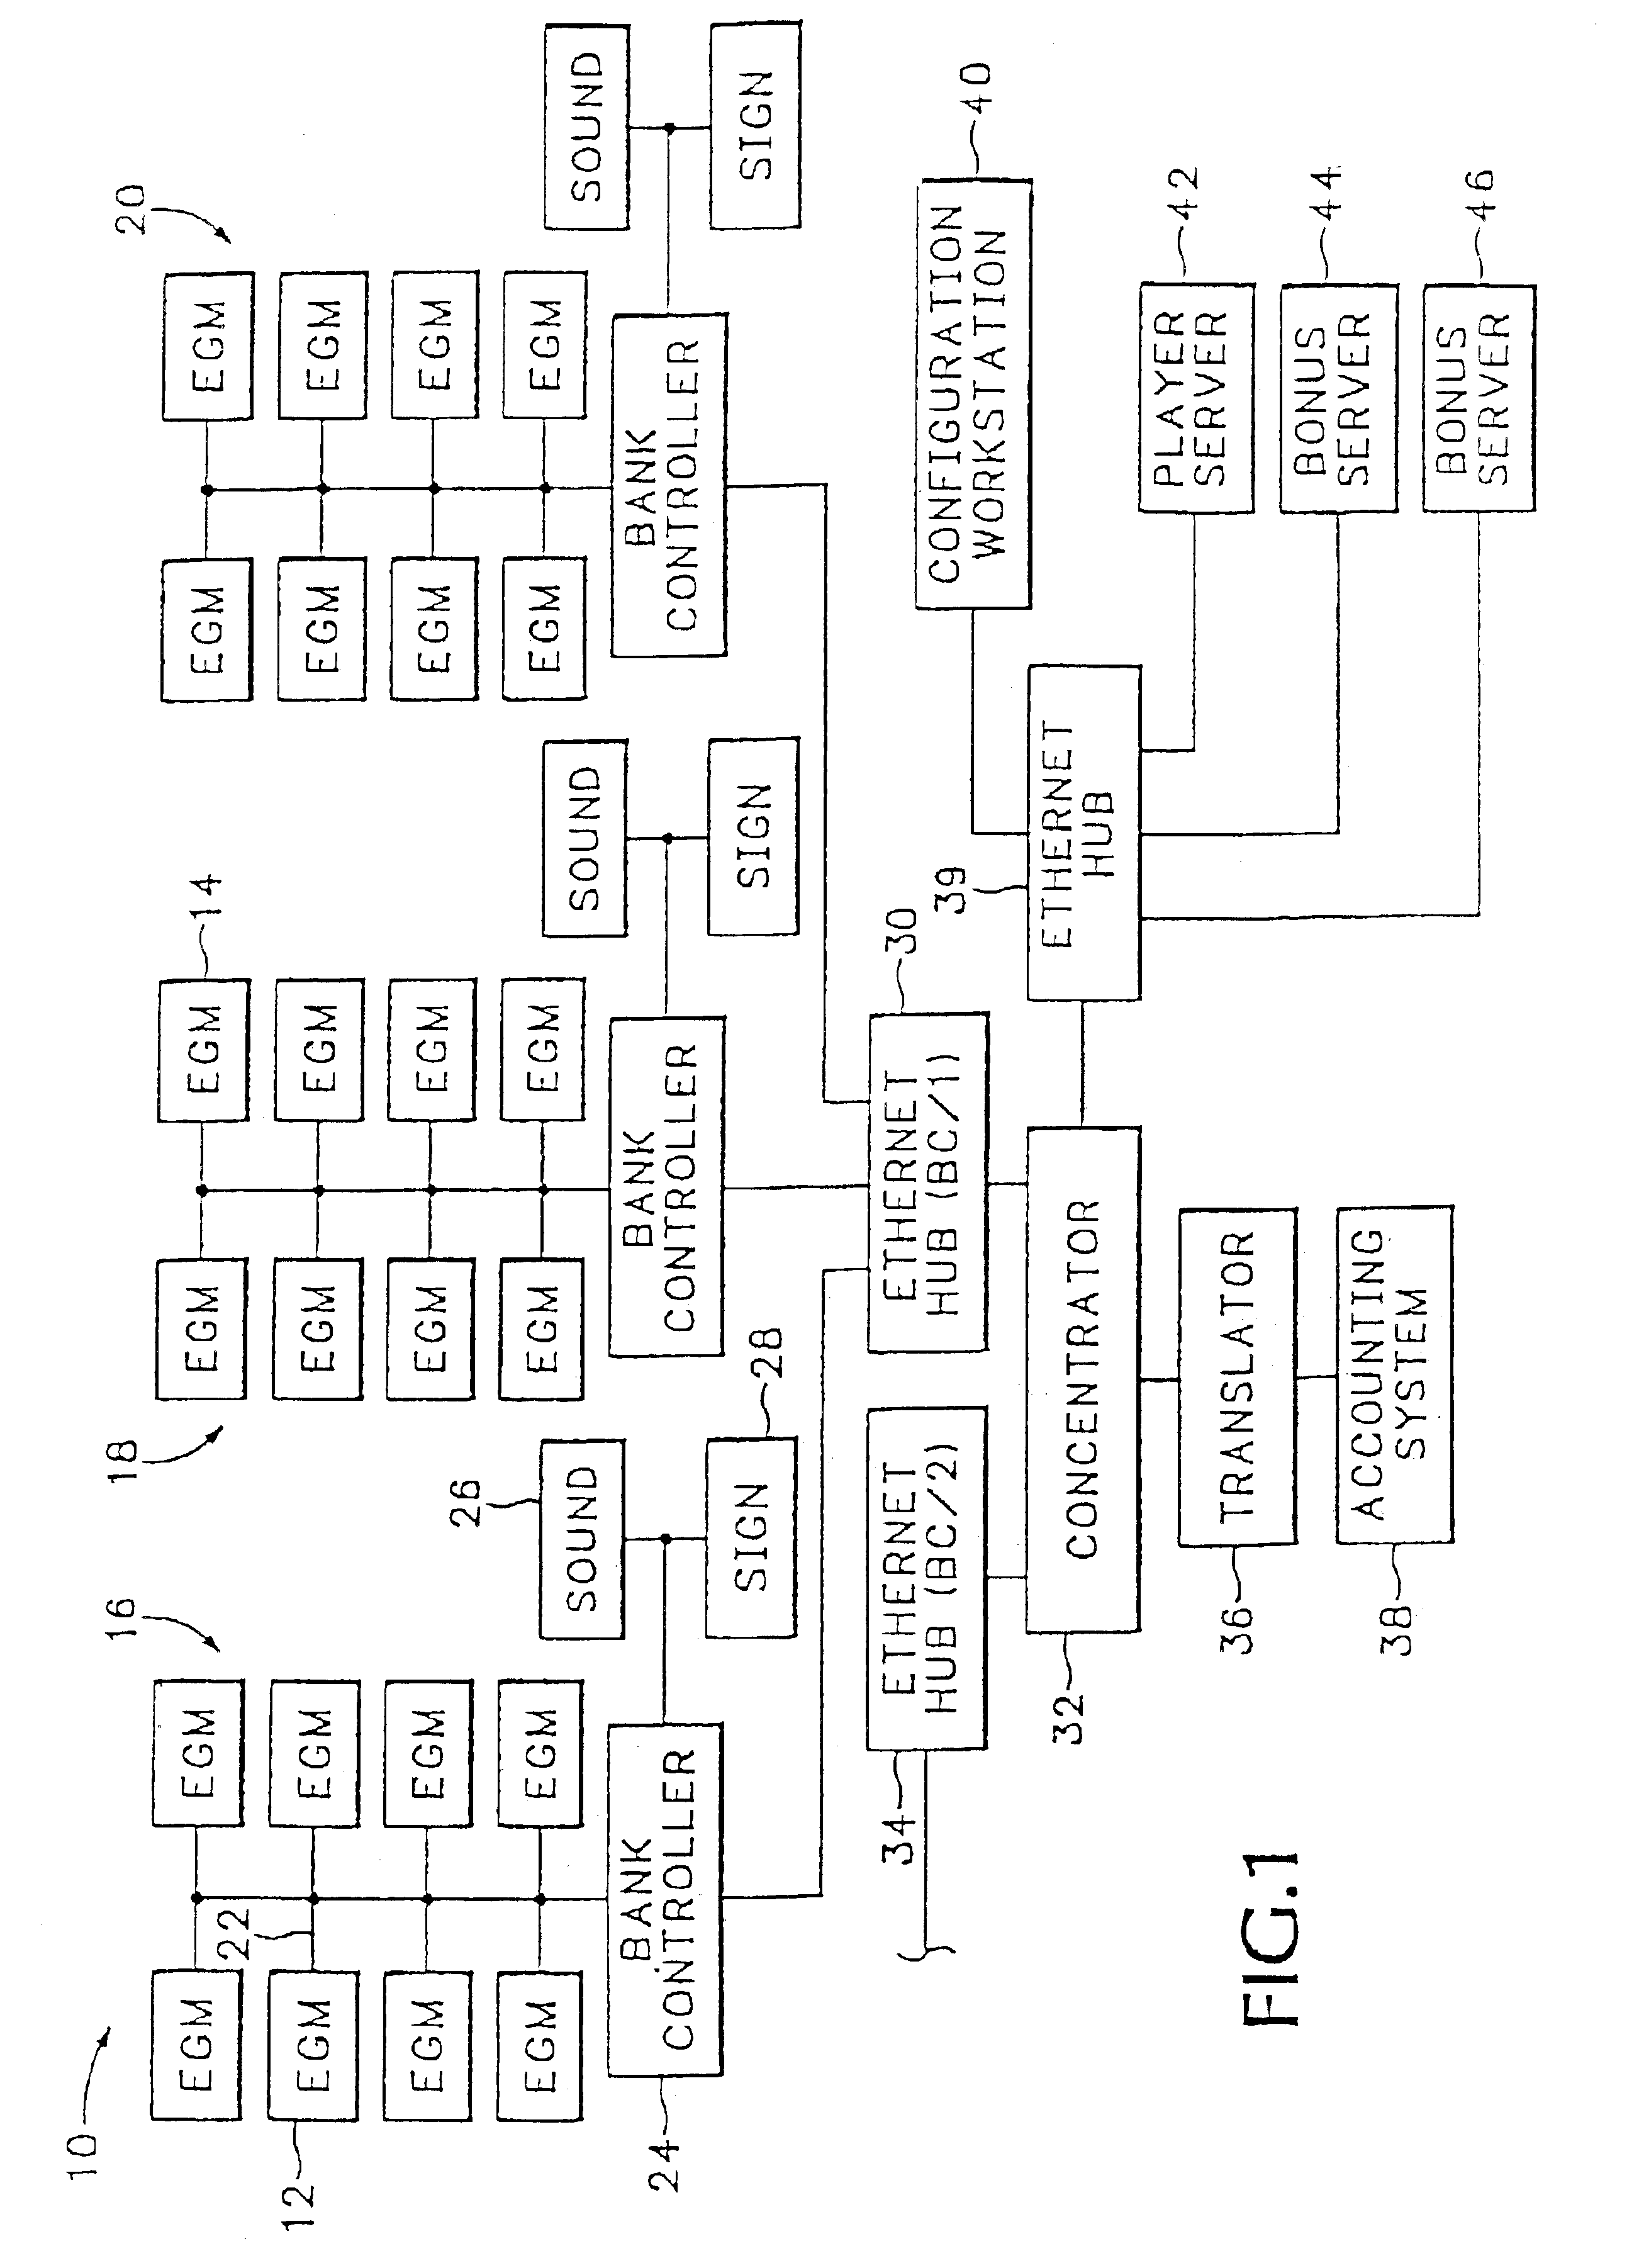 Method for implementing scheduled return play at gaming machine networks